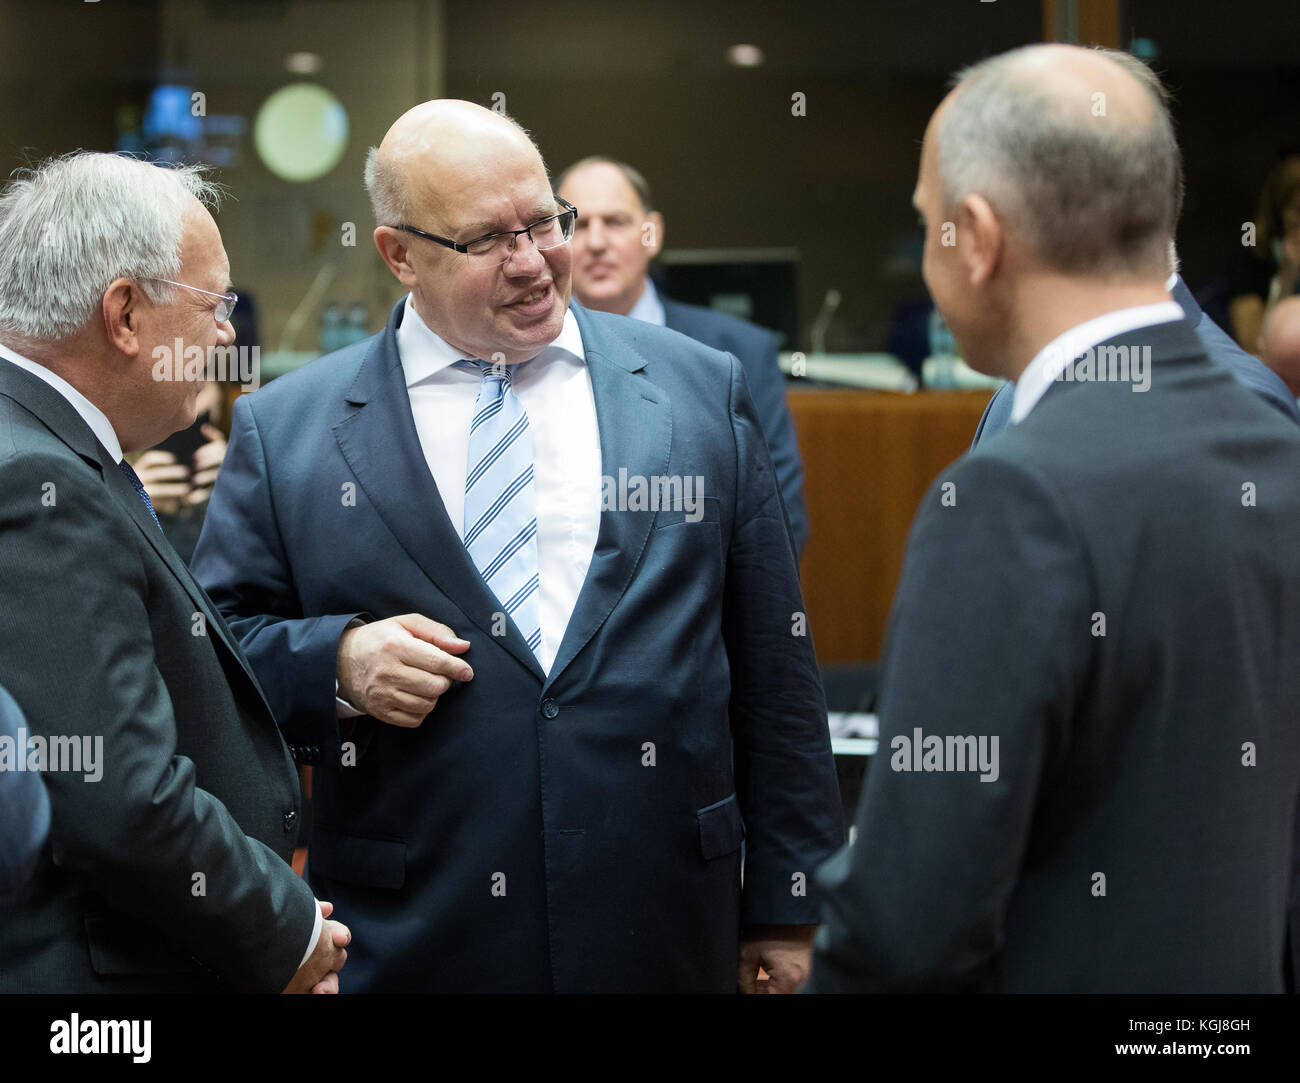 Brussels, Belgium, November 7, 2017: Swiss federal councillor Johann Schneider-Ammann (L) is talking with the German Chief of Staff and acting finance minister Peter Altmaier (R) during the European Finance Ministers meeting.- NO WIRE SERVICE - Photo: Thierry Monasse/dpa - NO WIRE SERVICE - Photo: Thierry Monasse/dpa Stock Photo